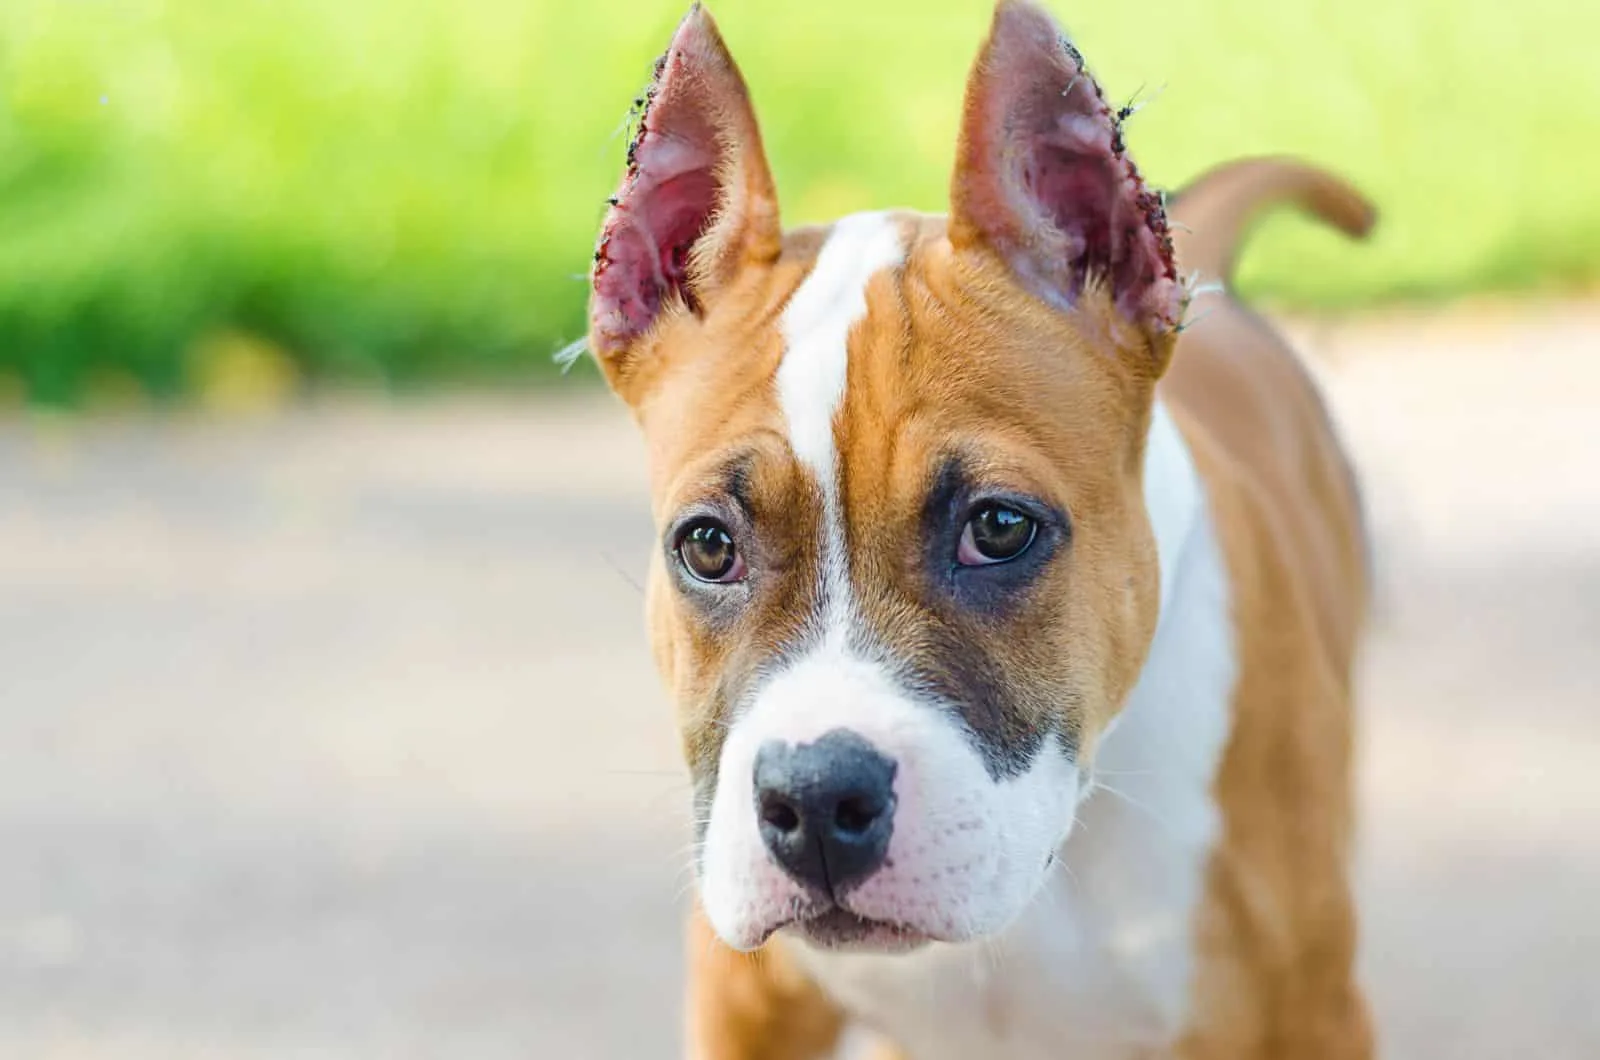 American Staffordshire Terrier with cropped ears